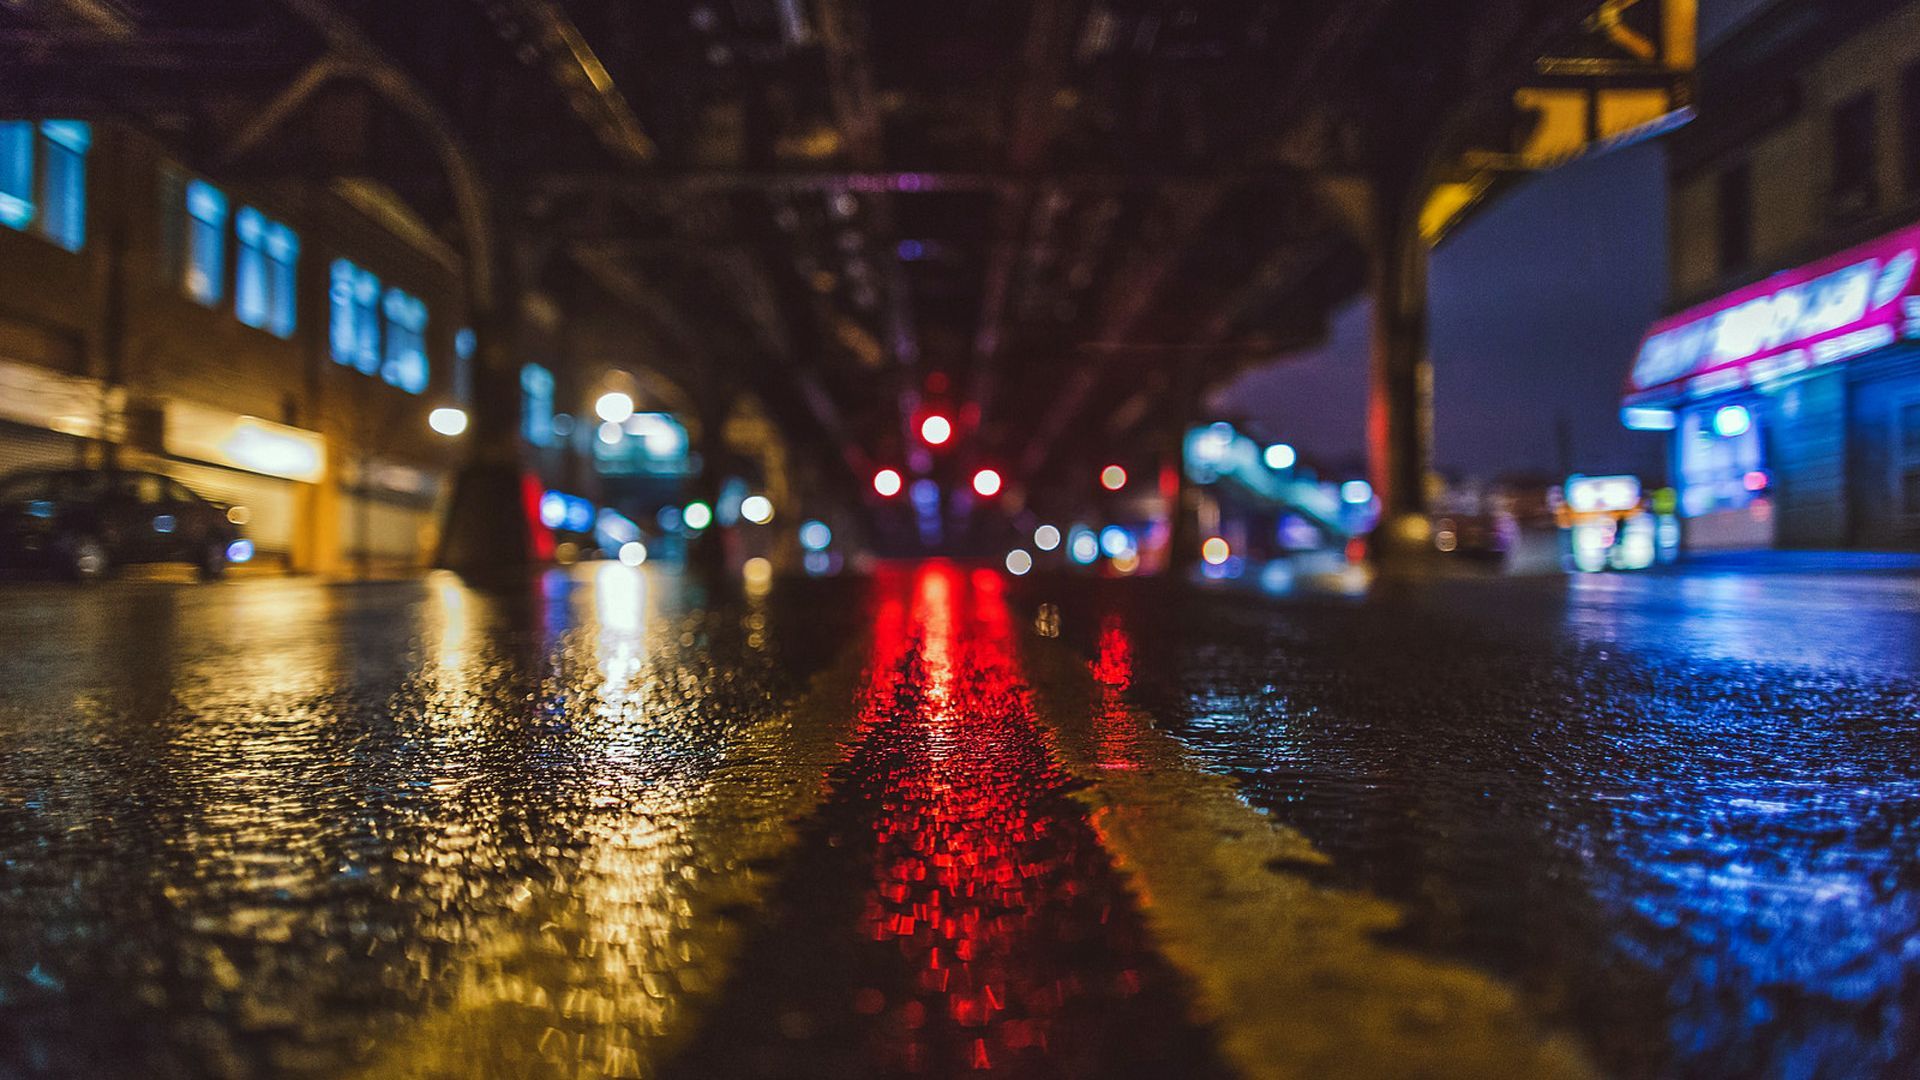 A street with red lights at night - Rain, New York